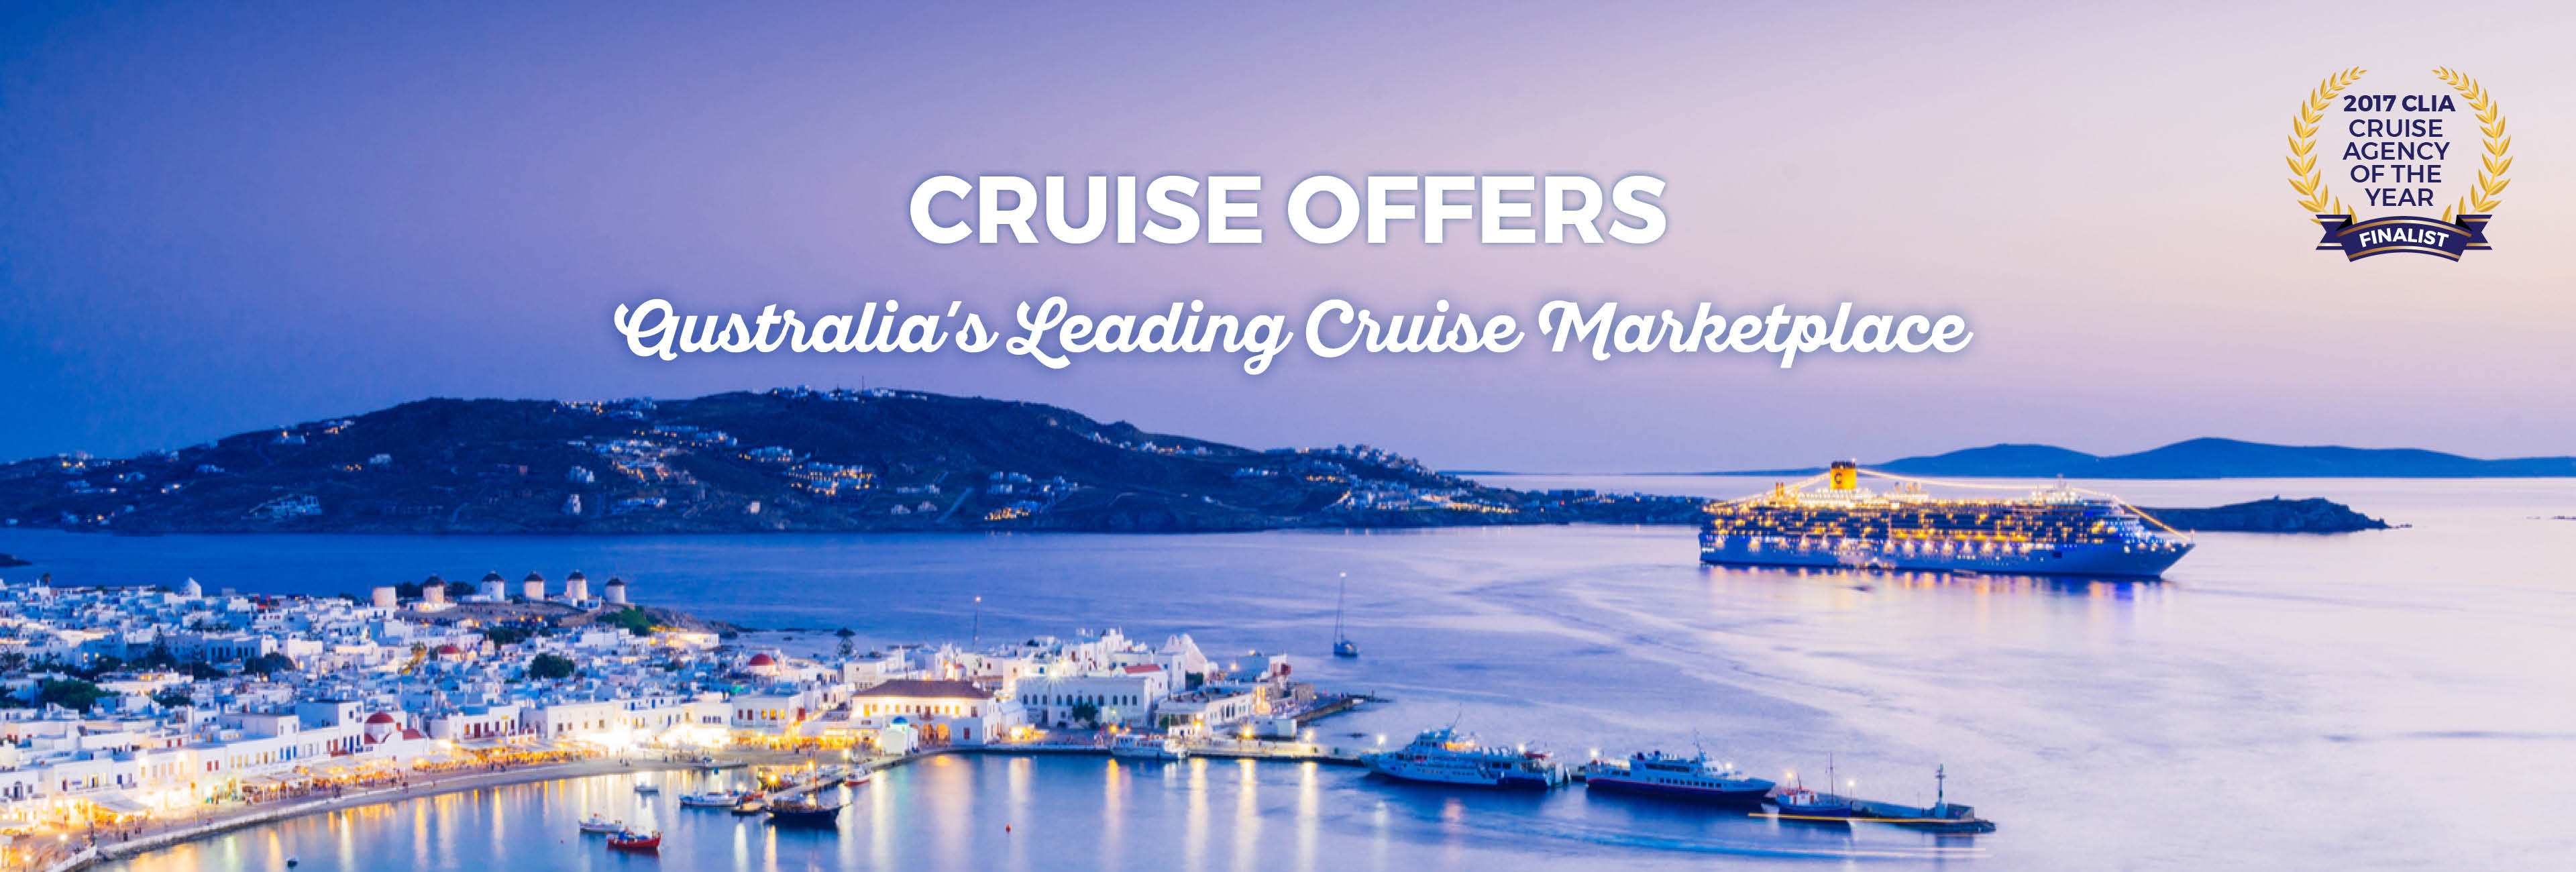 cruise-offers-about-us-1.jpg